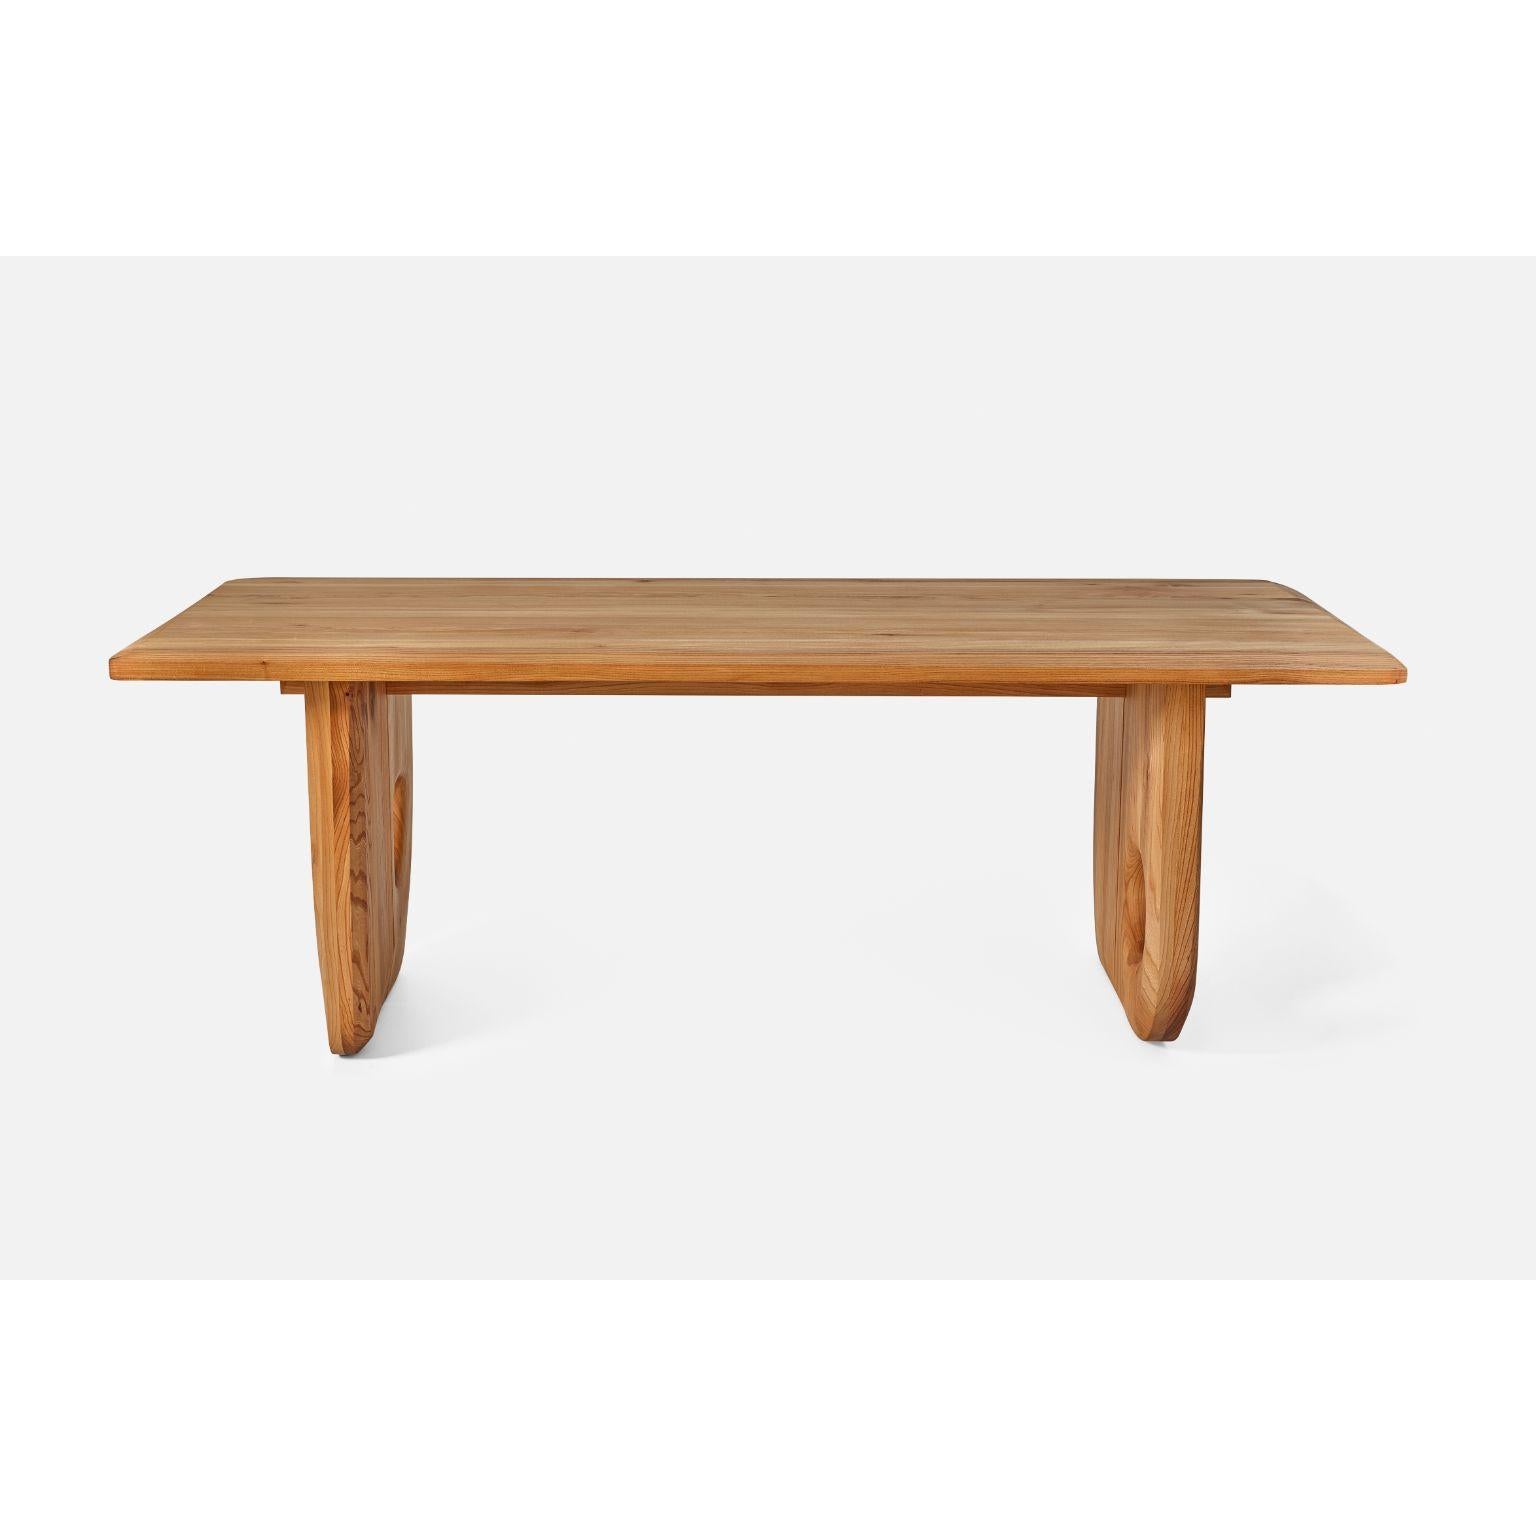 Herseh Dining Table L by Contemporary Ecowood
Dimensions: W 115 x D 270 x H 75 cm.
Materials: American Oak.
Color: Natural

Contemporary Ecowood’s story began in a craft workshop in 2009. Our wood passion made us focus on fallen trees in the